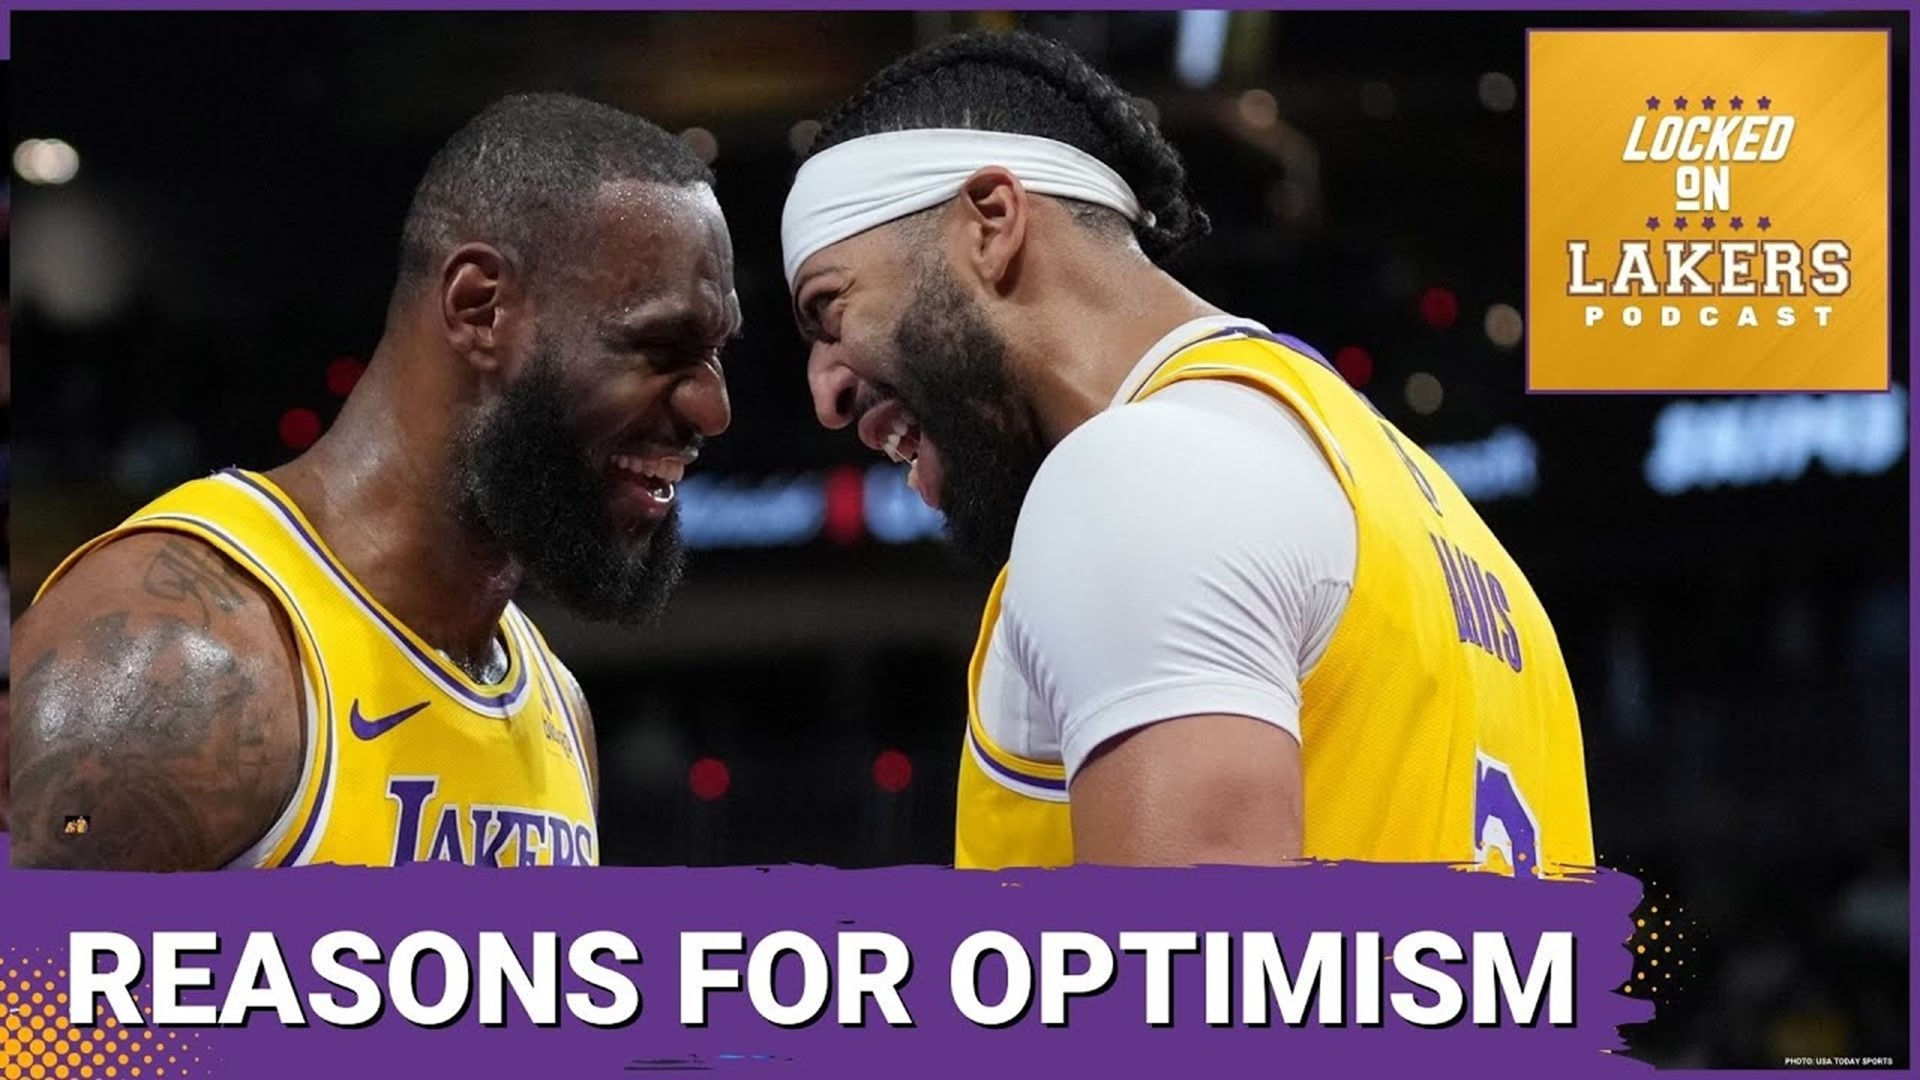 The Lakers kick off the second half of the season tonight in San Francisco against the Warriors, and they'll do it without LeBron James.